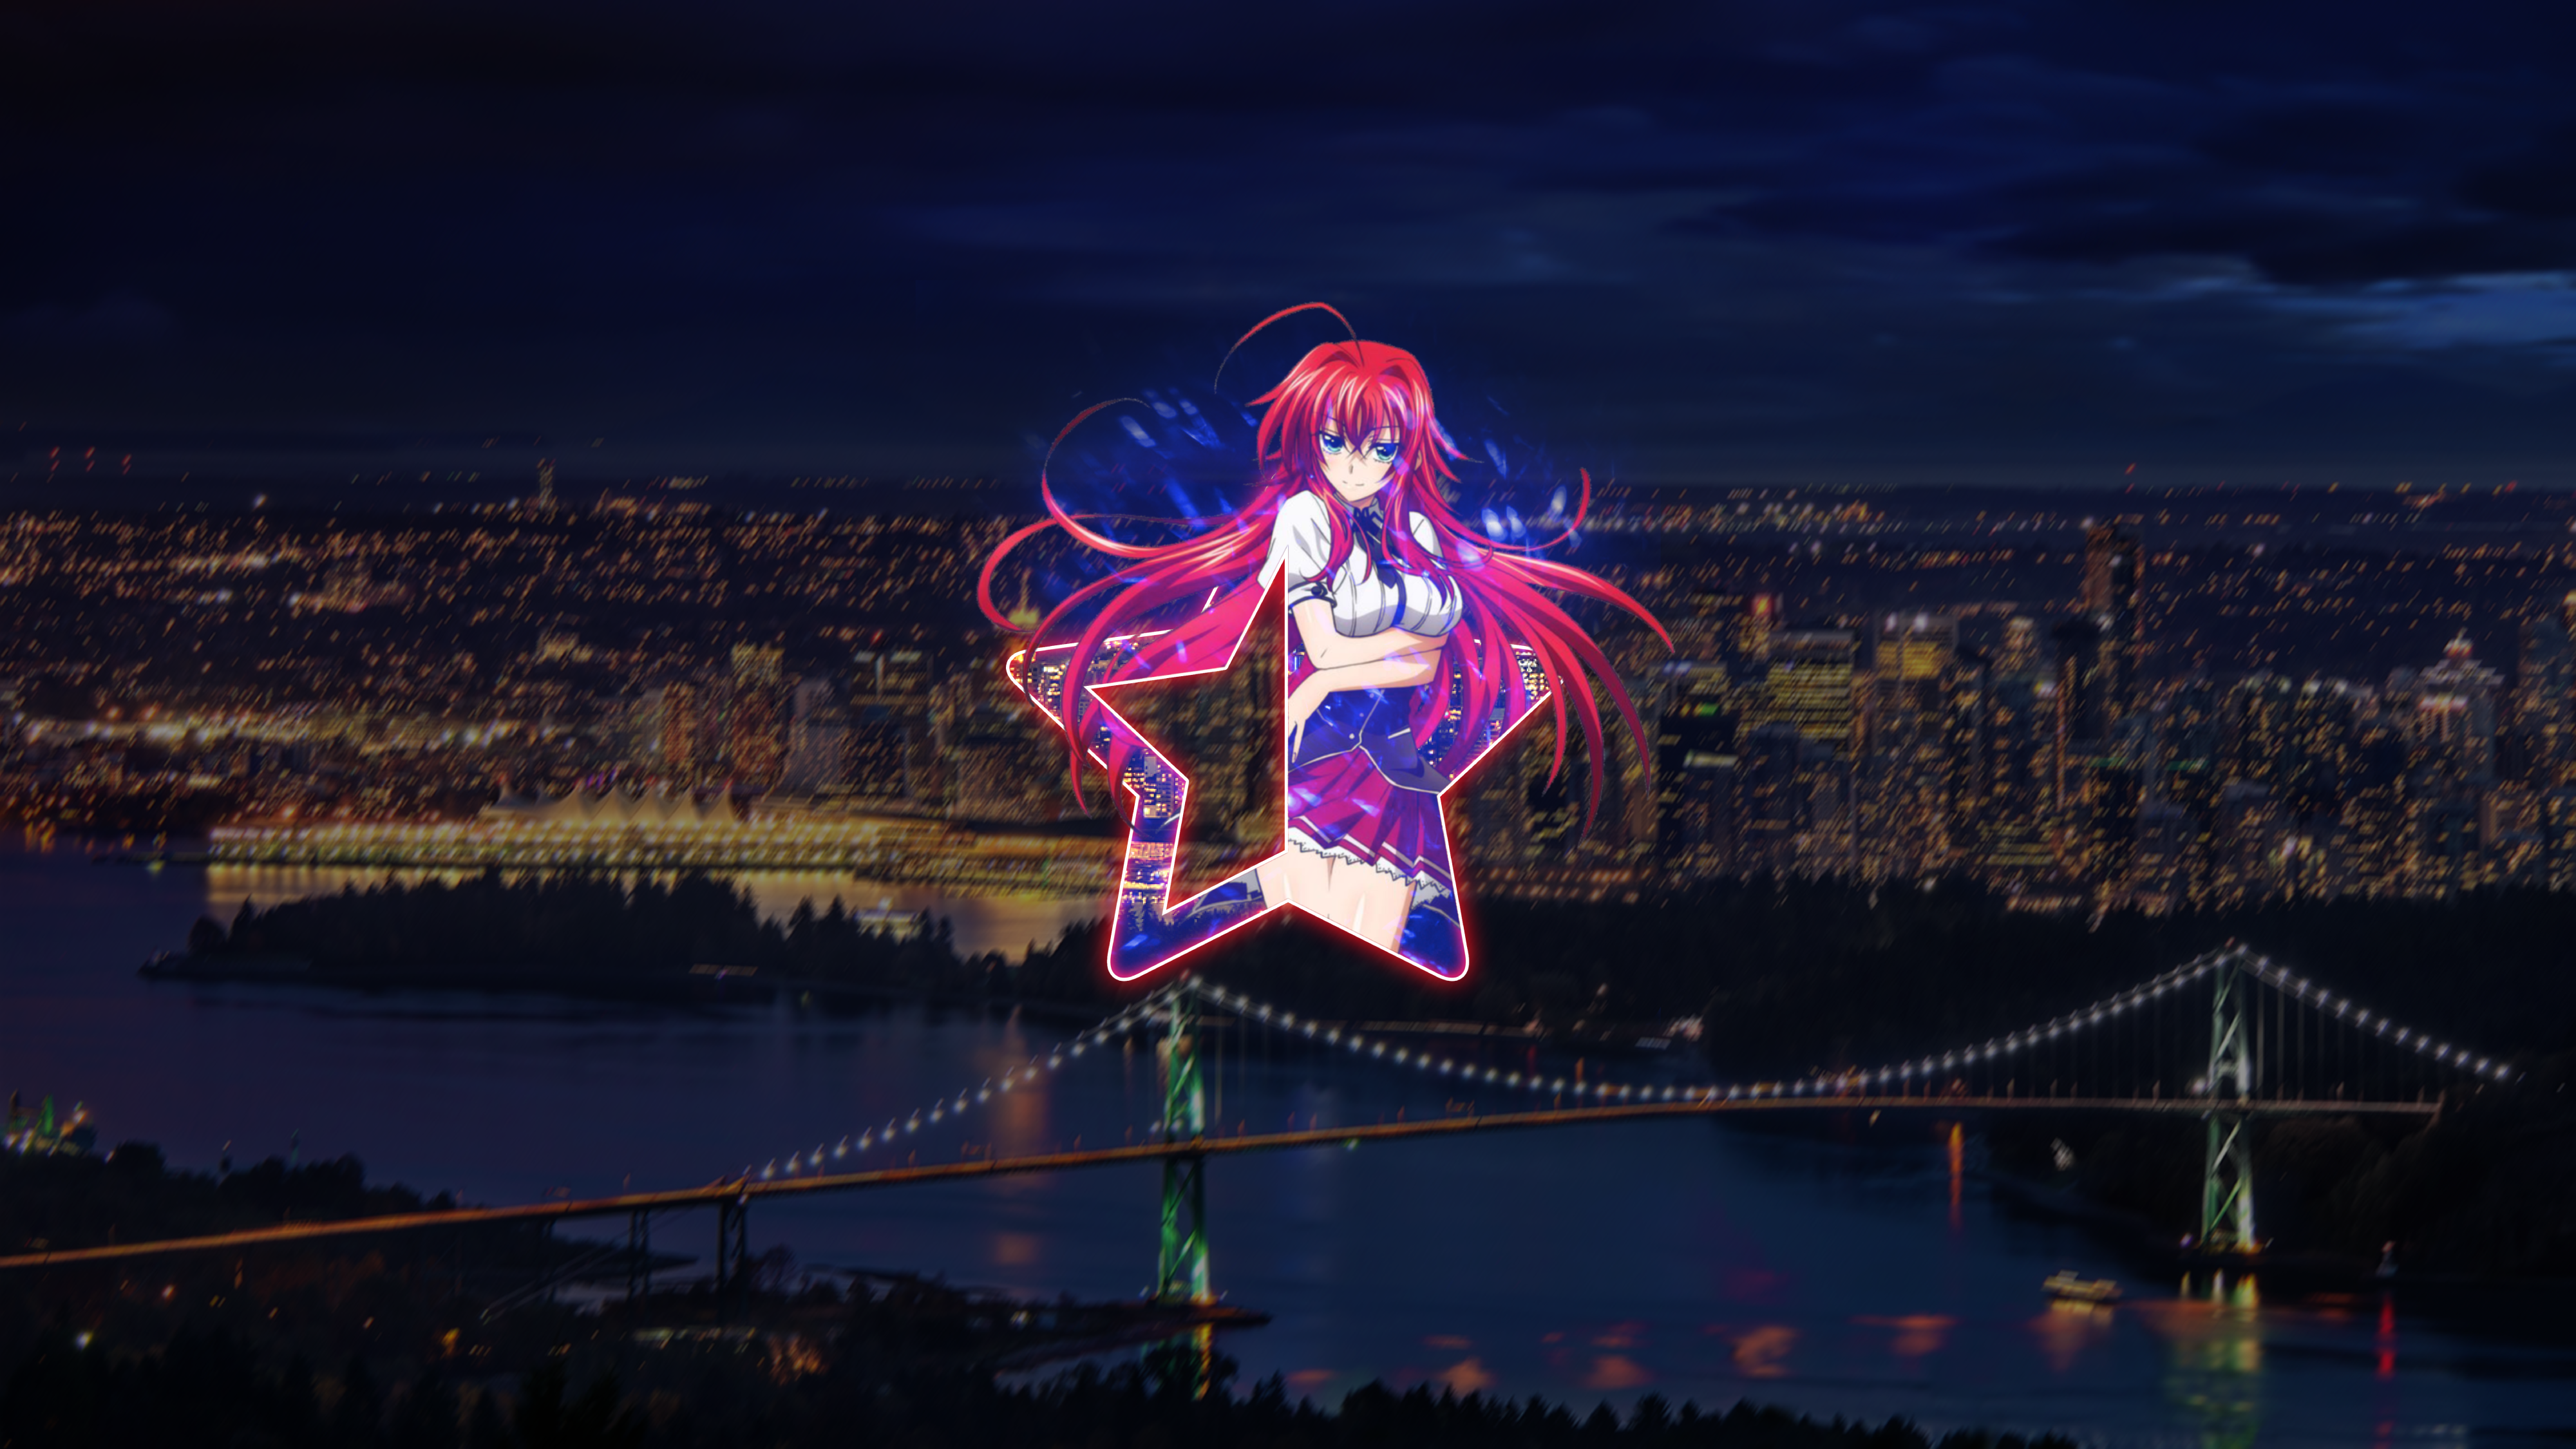 Anime 4000x2250 Gremory Rias High School DxD digital art picture-in-picture anime girls anime sky redhead blue eyes long hair